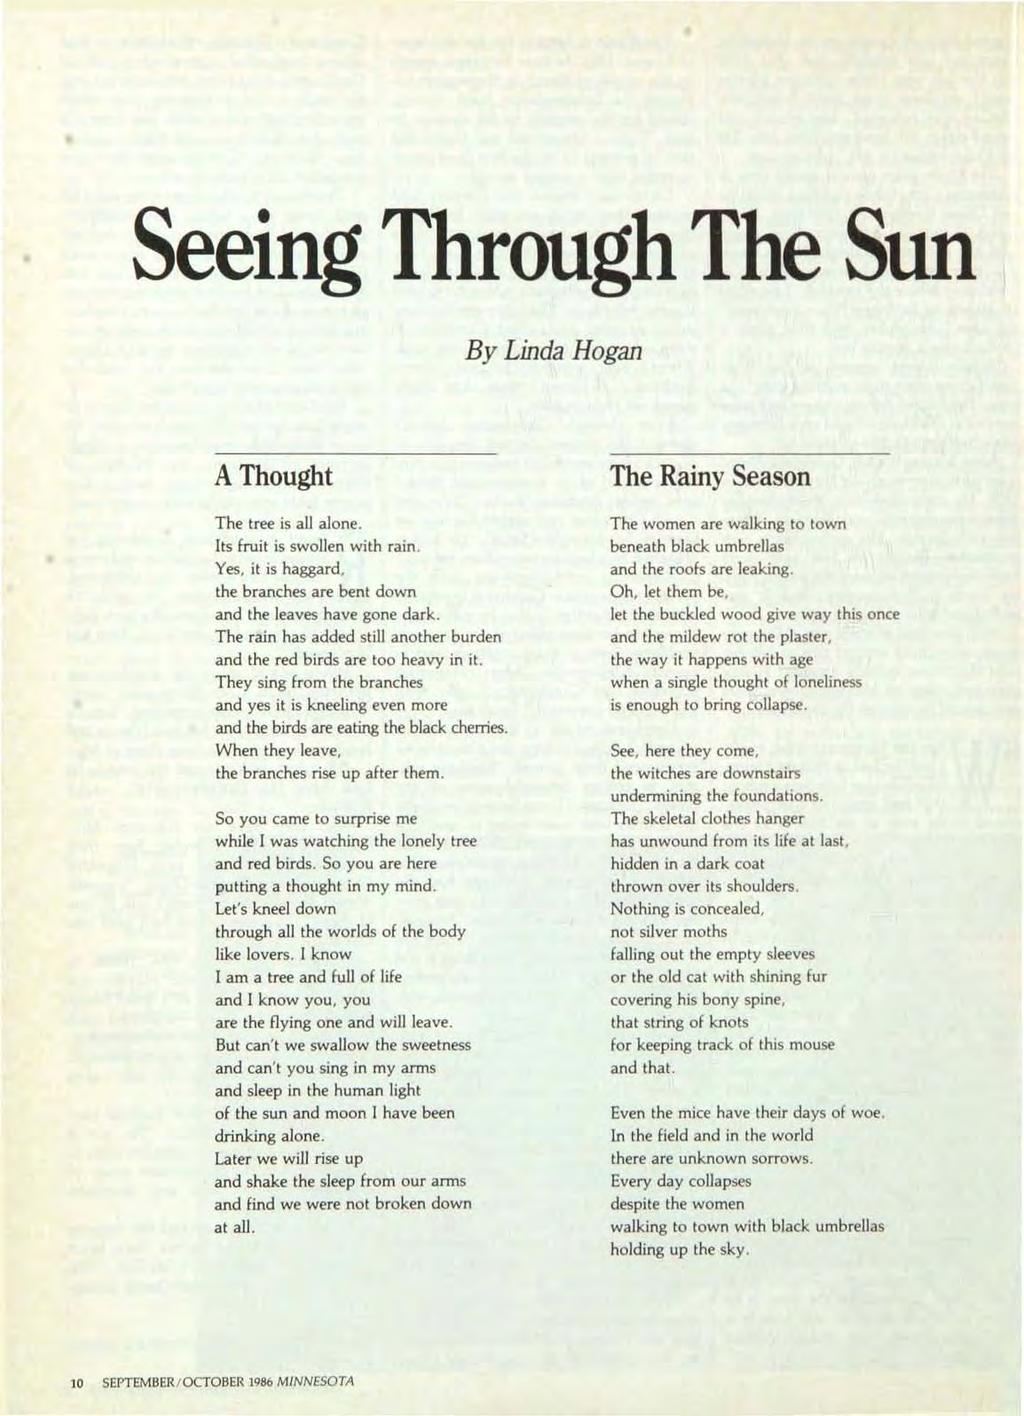 Seeing Through The Sun By Linda Hogan A Thought The tree is all alone. Its fruit is swollen with rain. Yes, it is haggard, the branches are bent down and the leaves have gone dark.